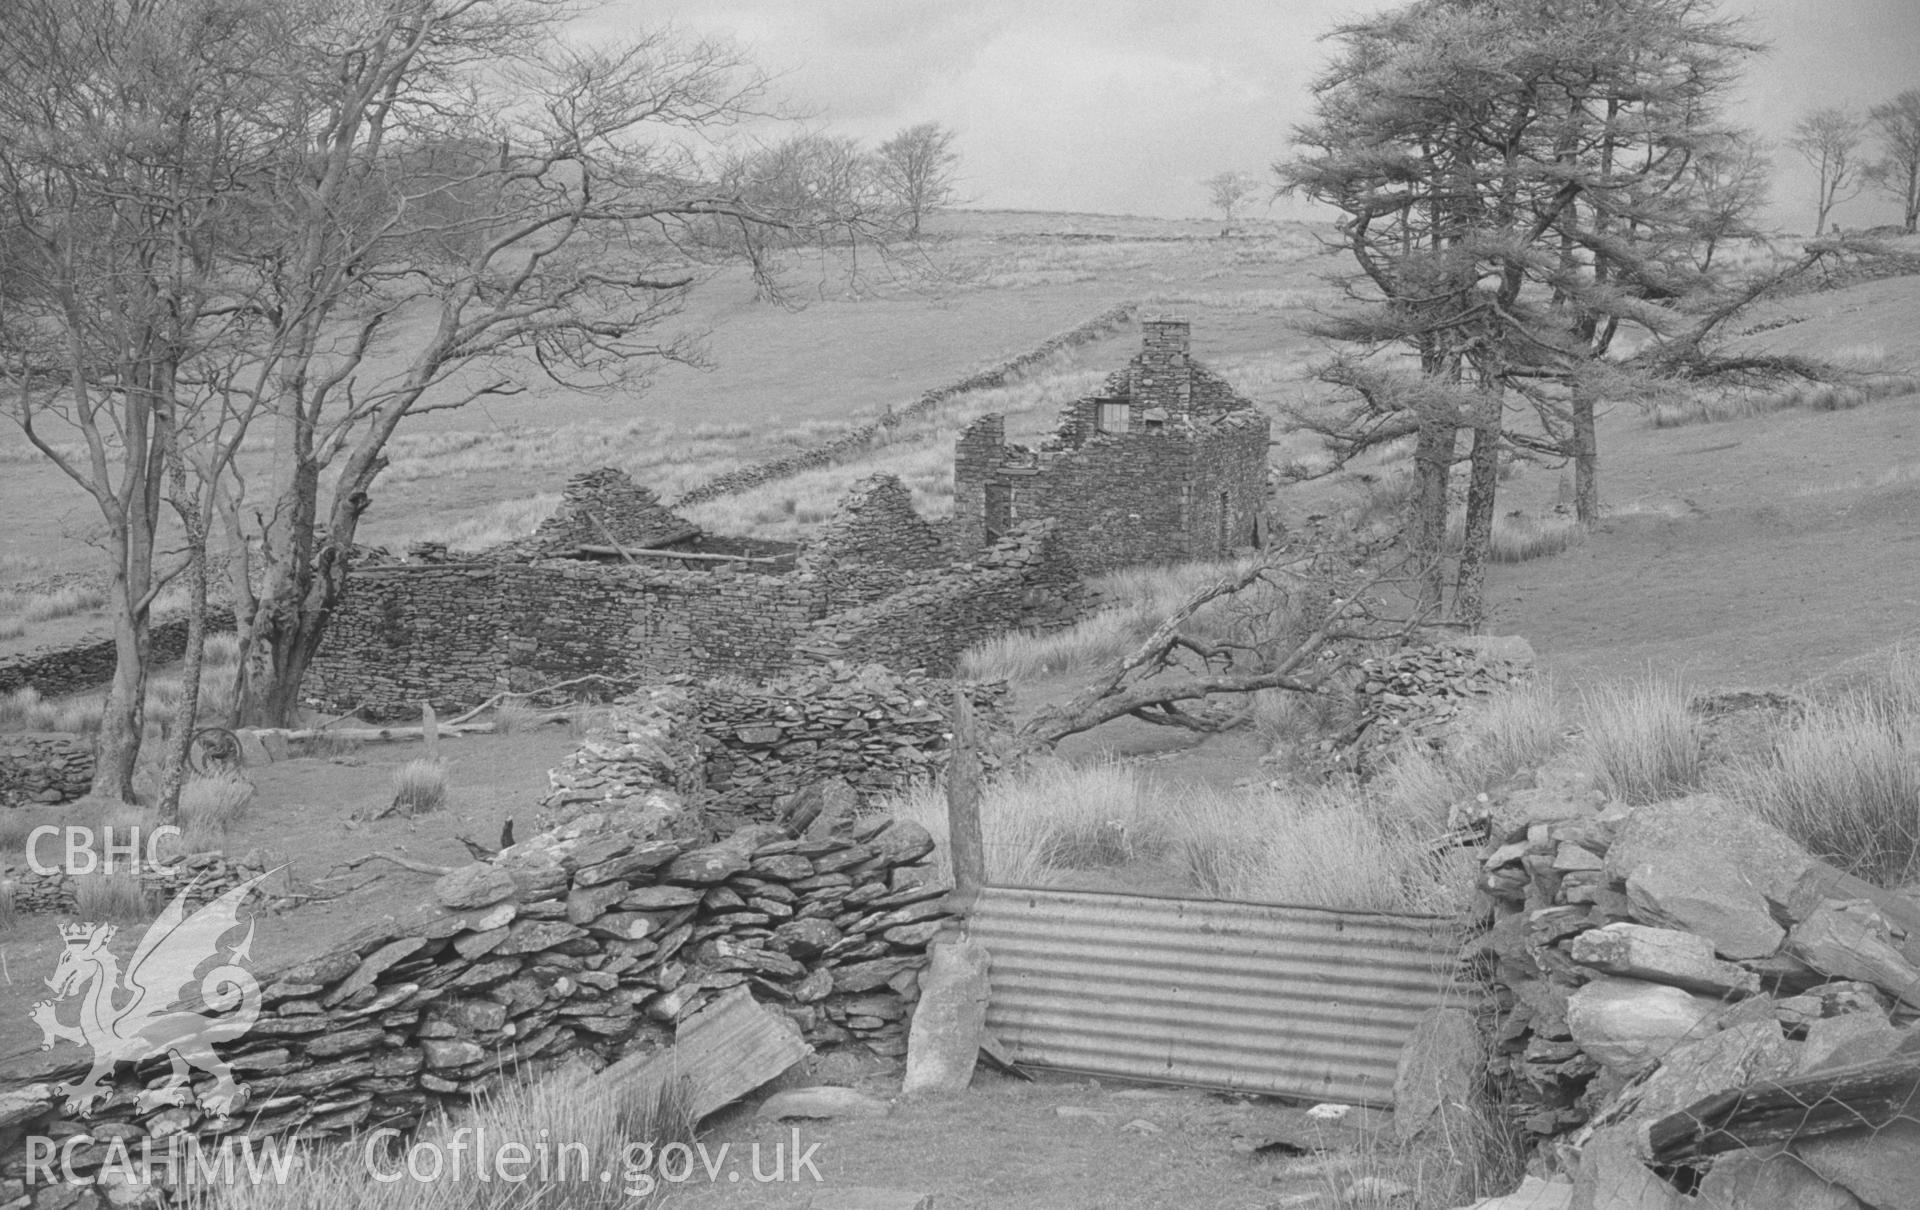 Digital copy of a black and white negative showing the ruins of Tan-y-Graig farmstead near Carn Gron, Gwar Ffynnon, Tregaron. Photographed by Arthur O. Chater in April 1966 from Grid Reference SN 729 605, looking north.